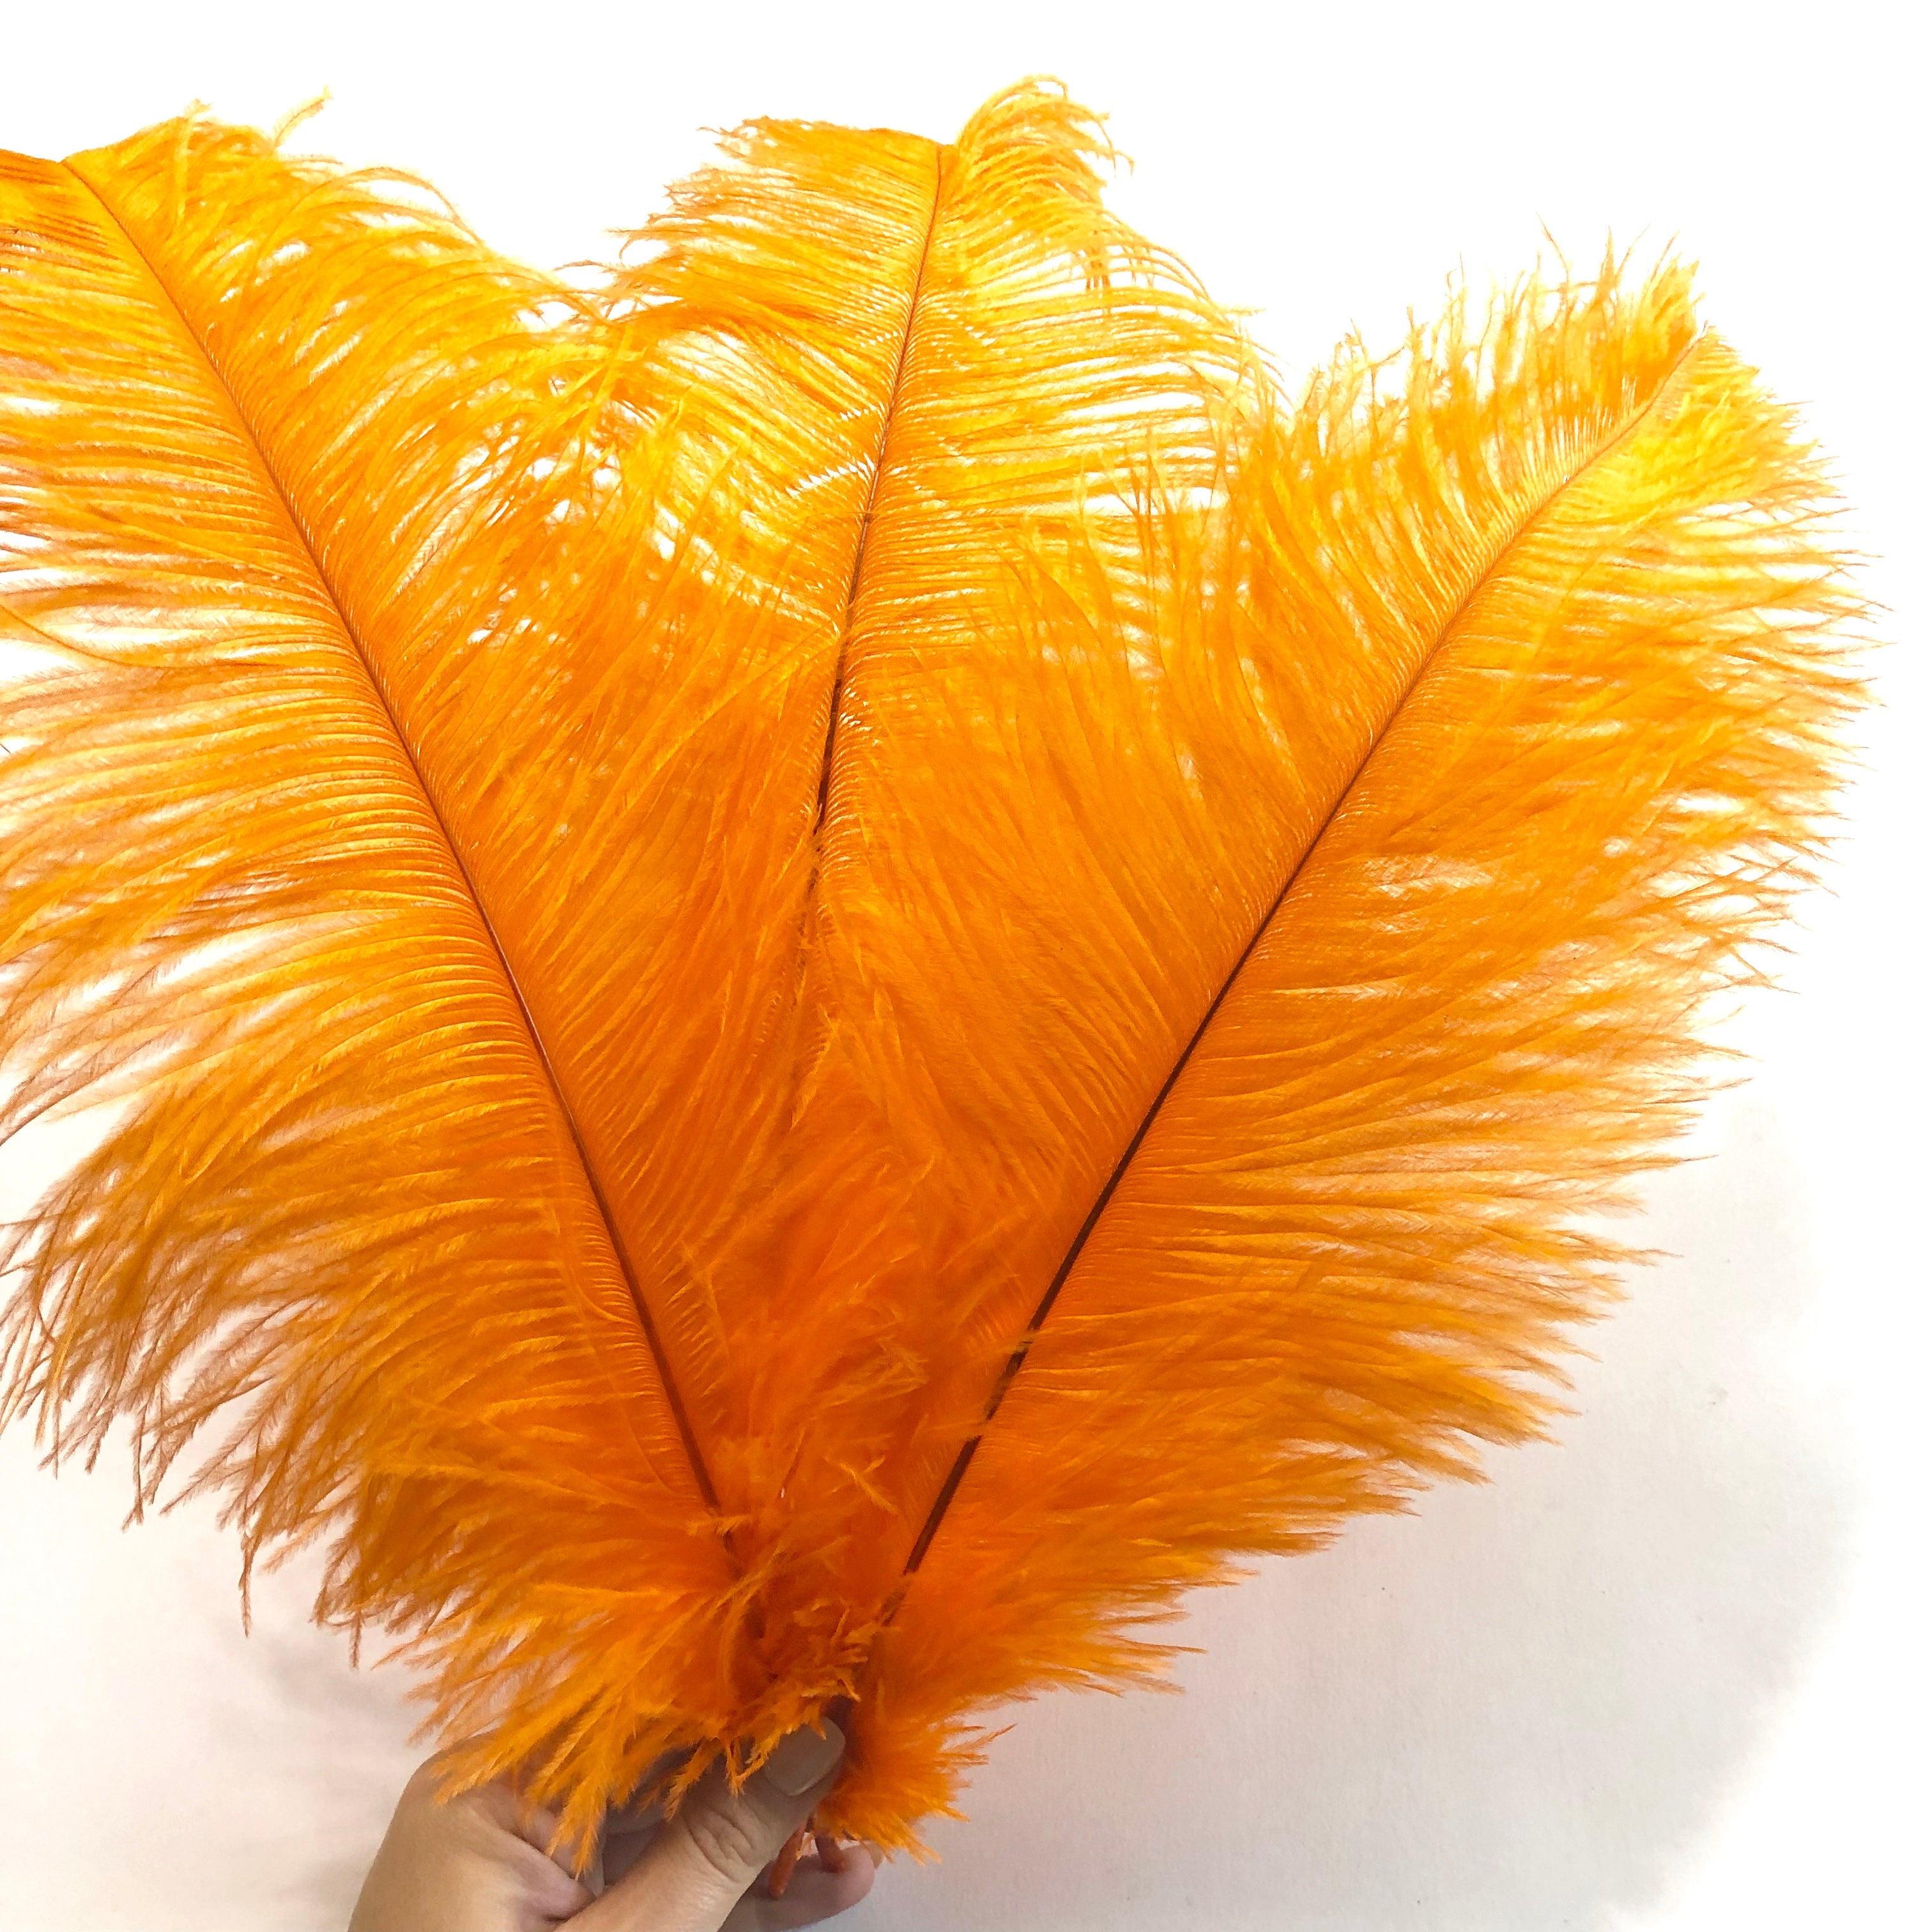 Ostrich Drab Feather 27-32cm - Orange *Seconds* Pack of 5